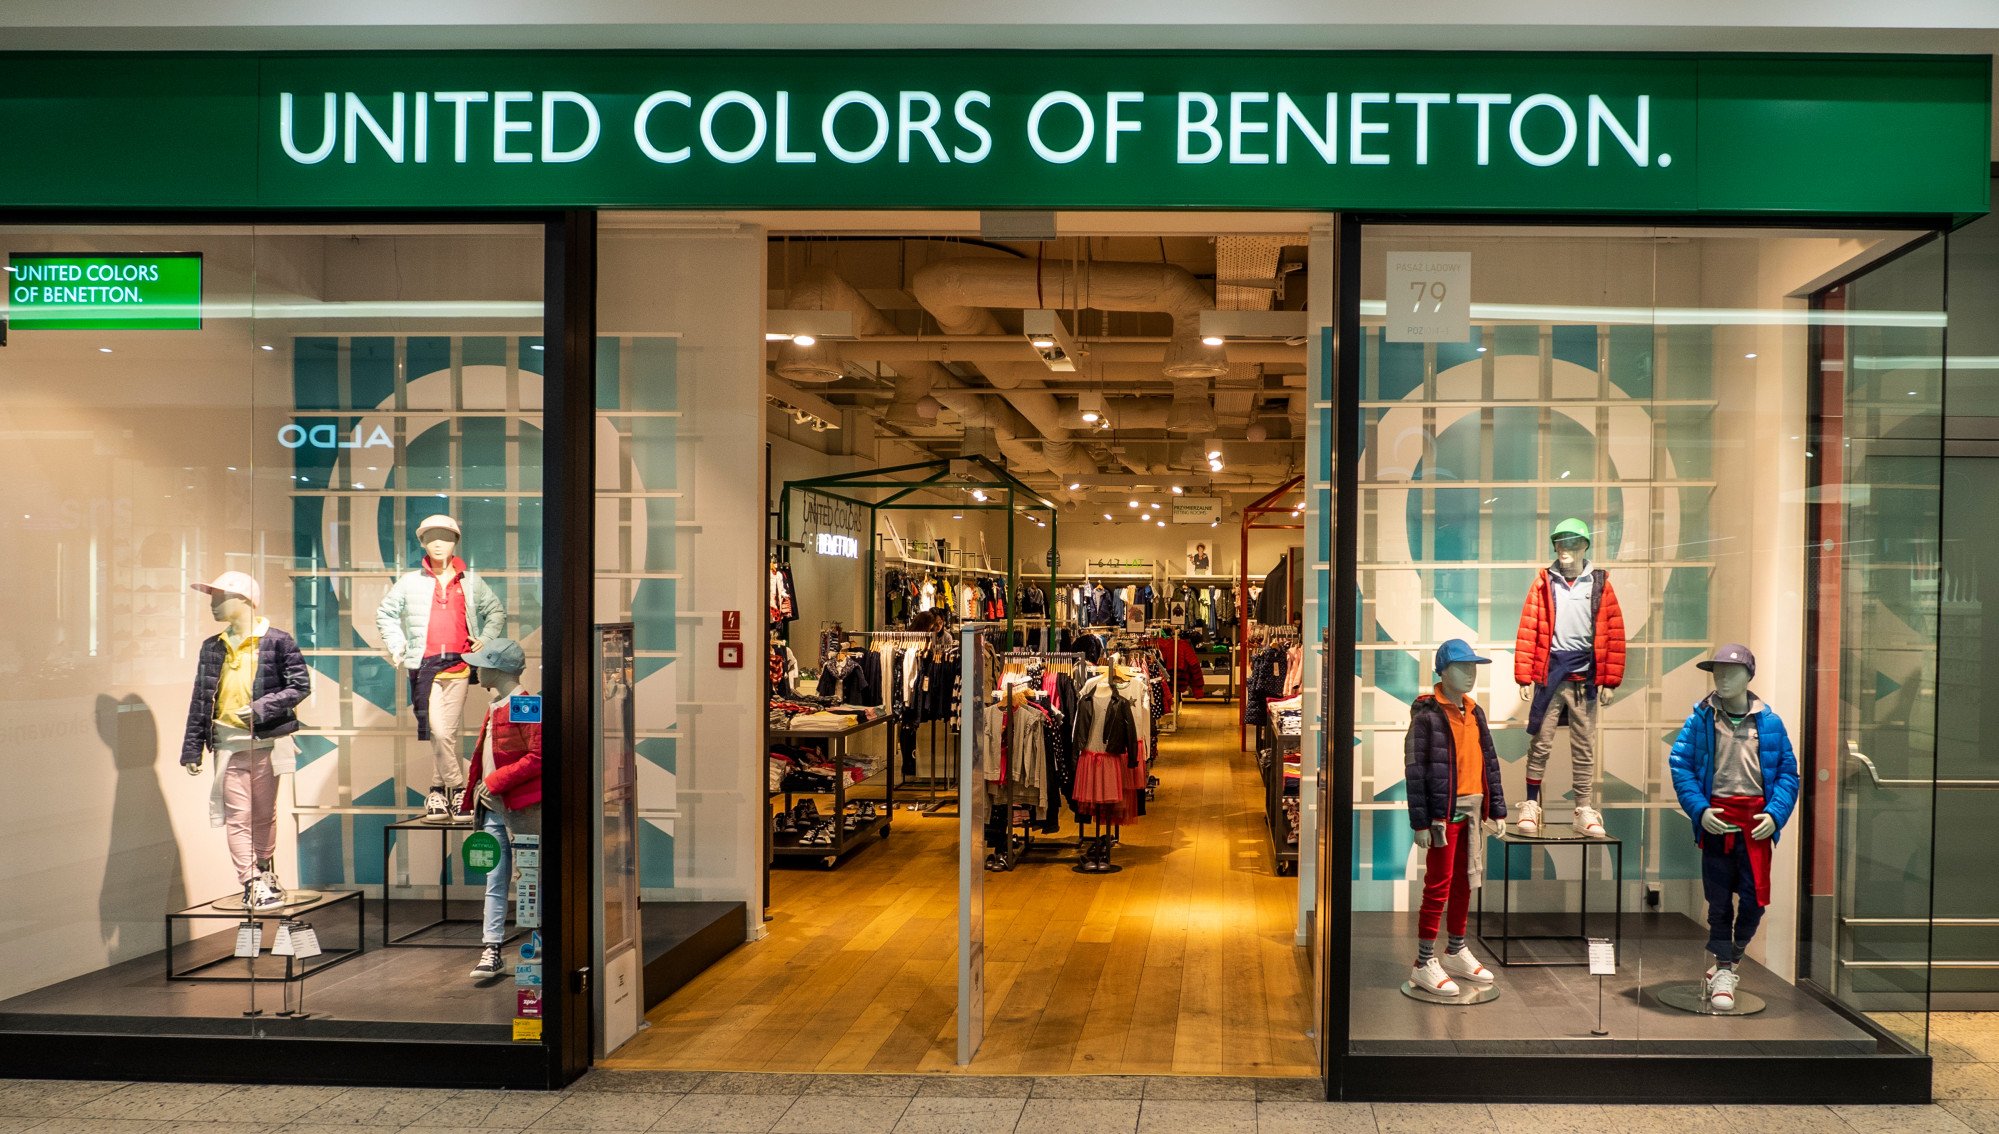 ornament Gelijkenis Miniatuur What happened to United Colors of Benetton? How Zara, H&M and Uniqlo stole  its thunder | South China Morning Post